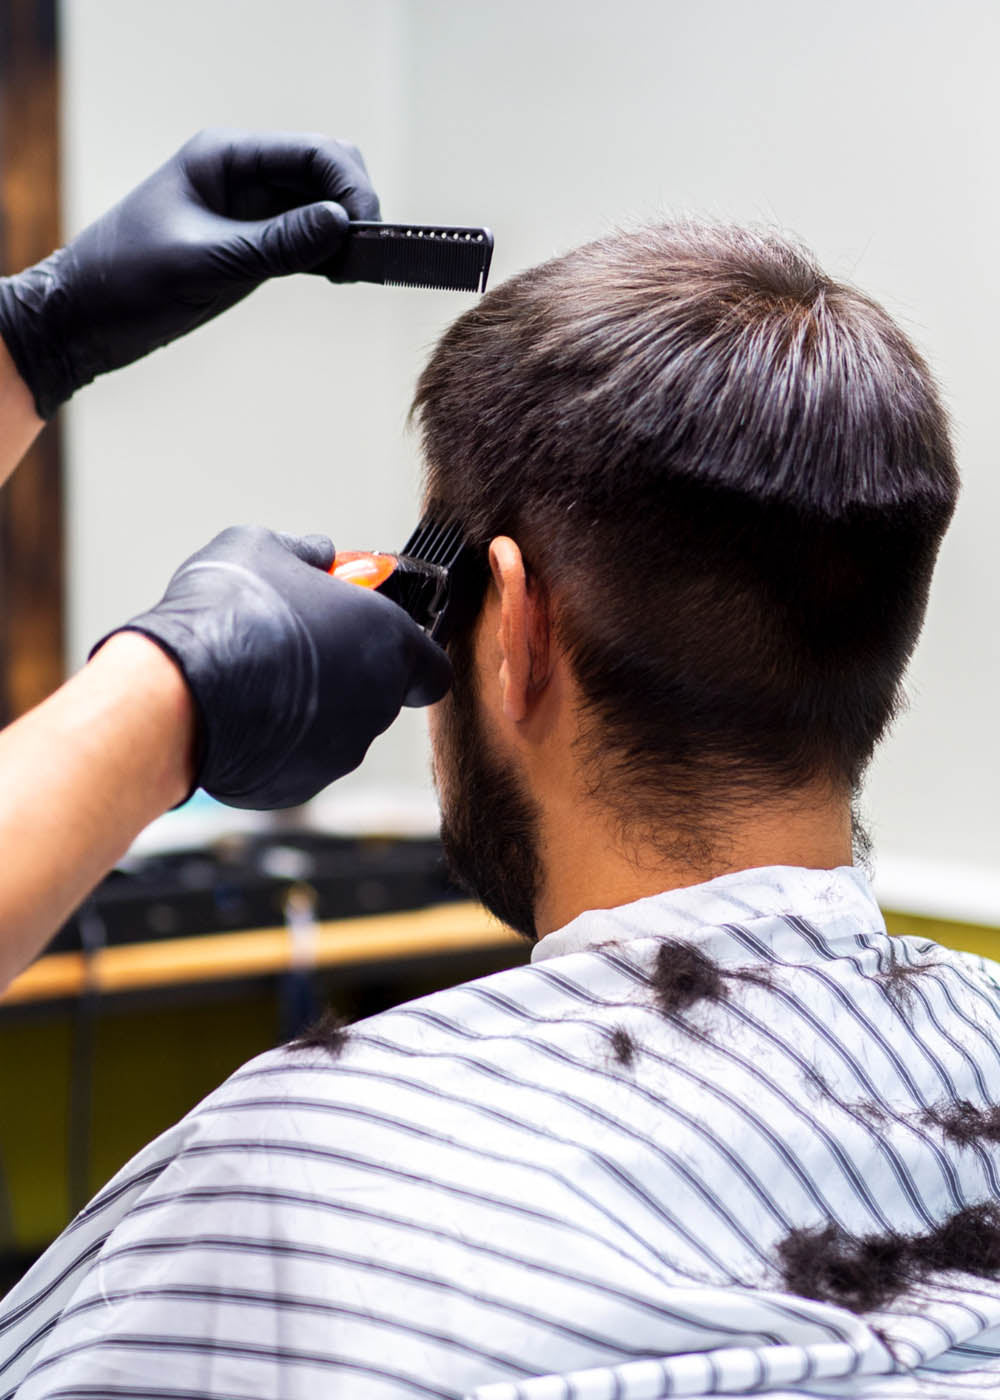 Man having his hair cut with some clippers